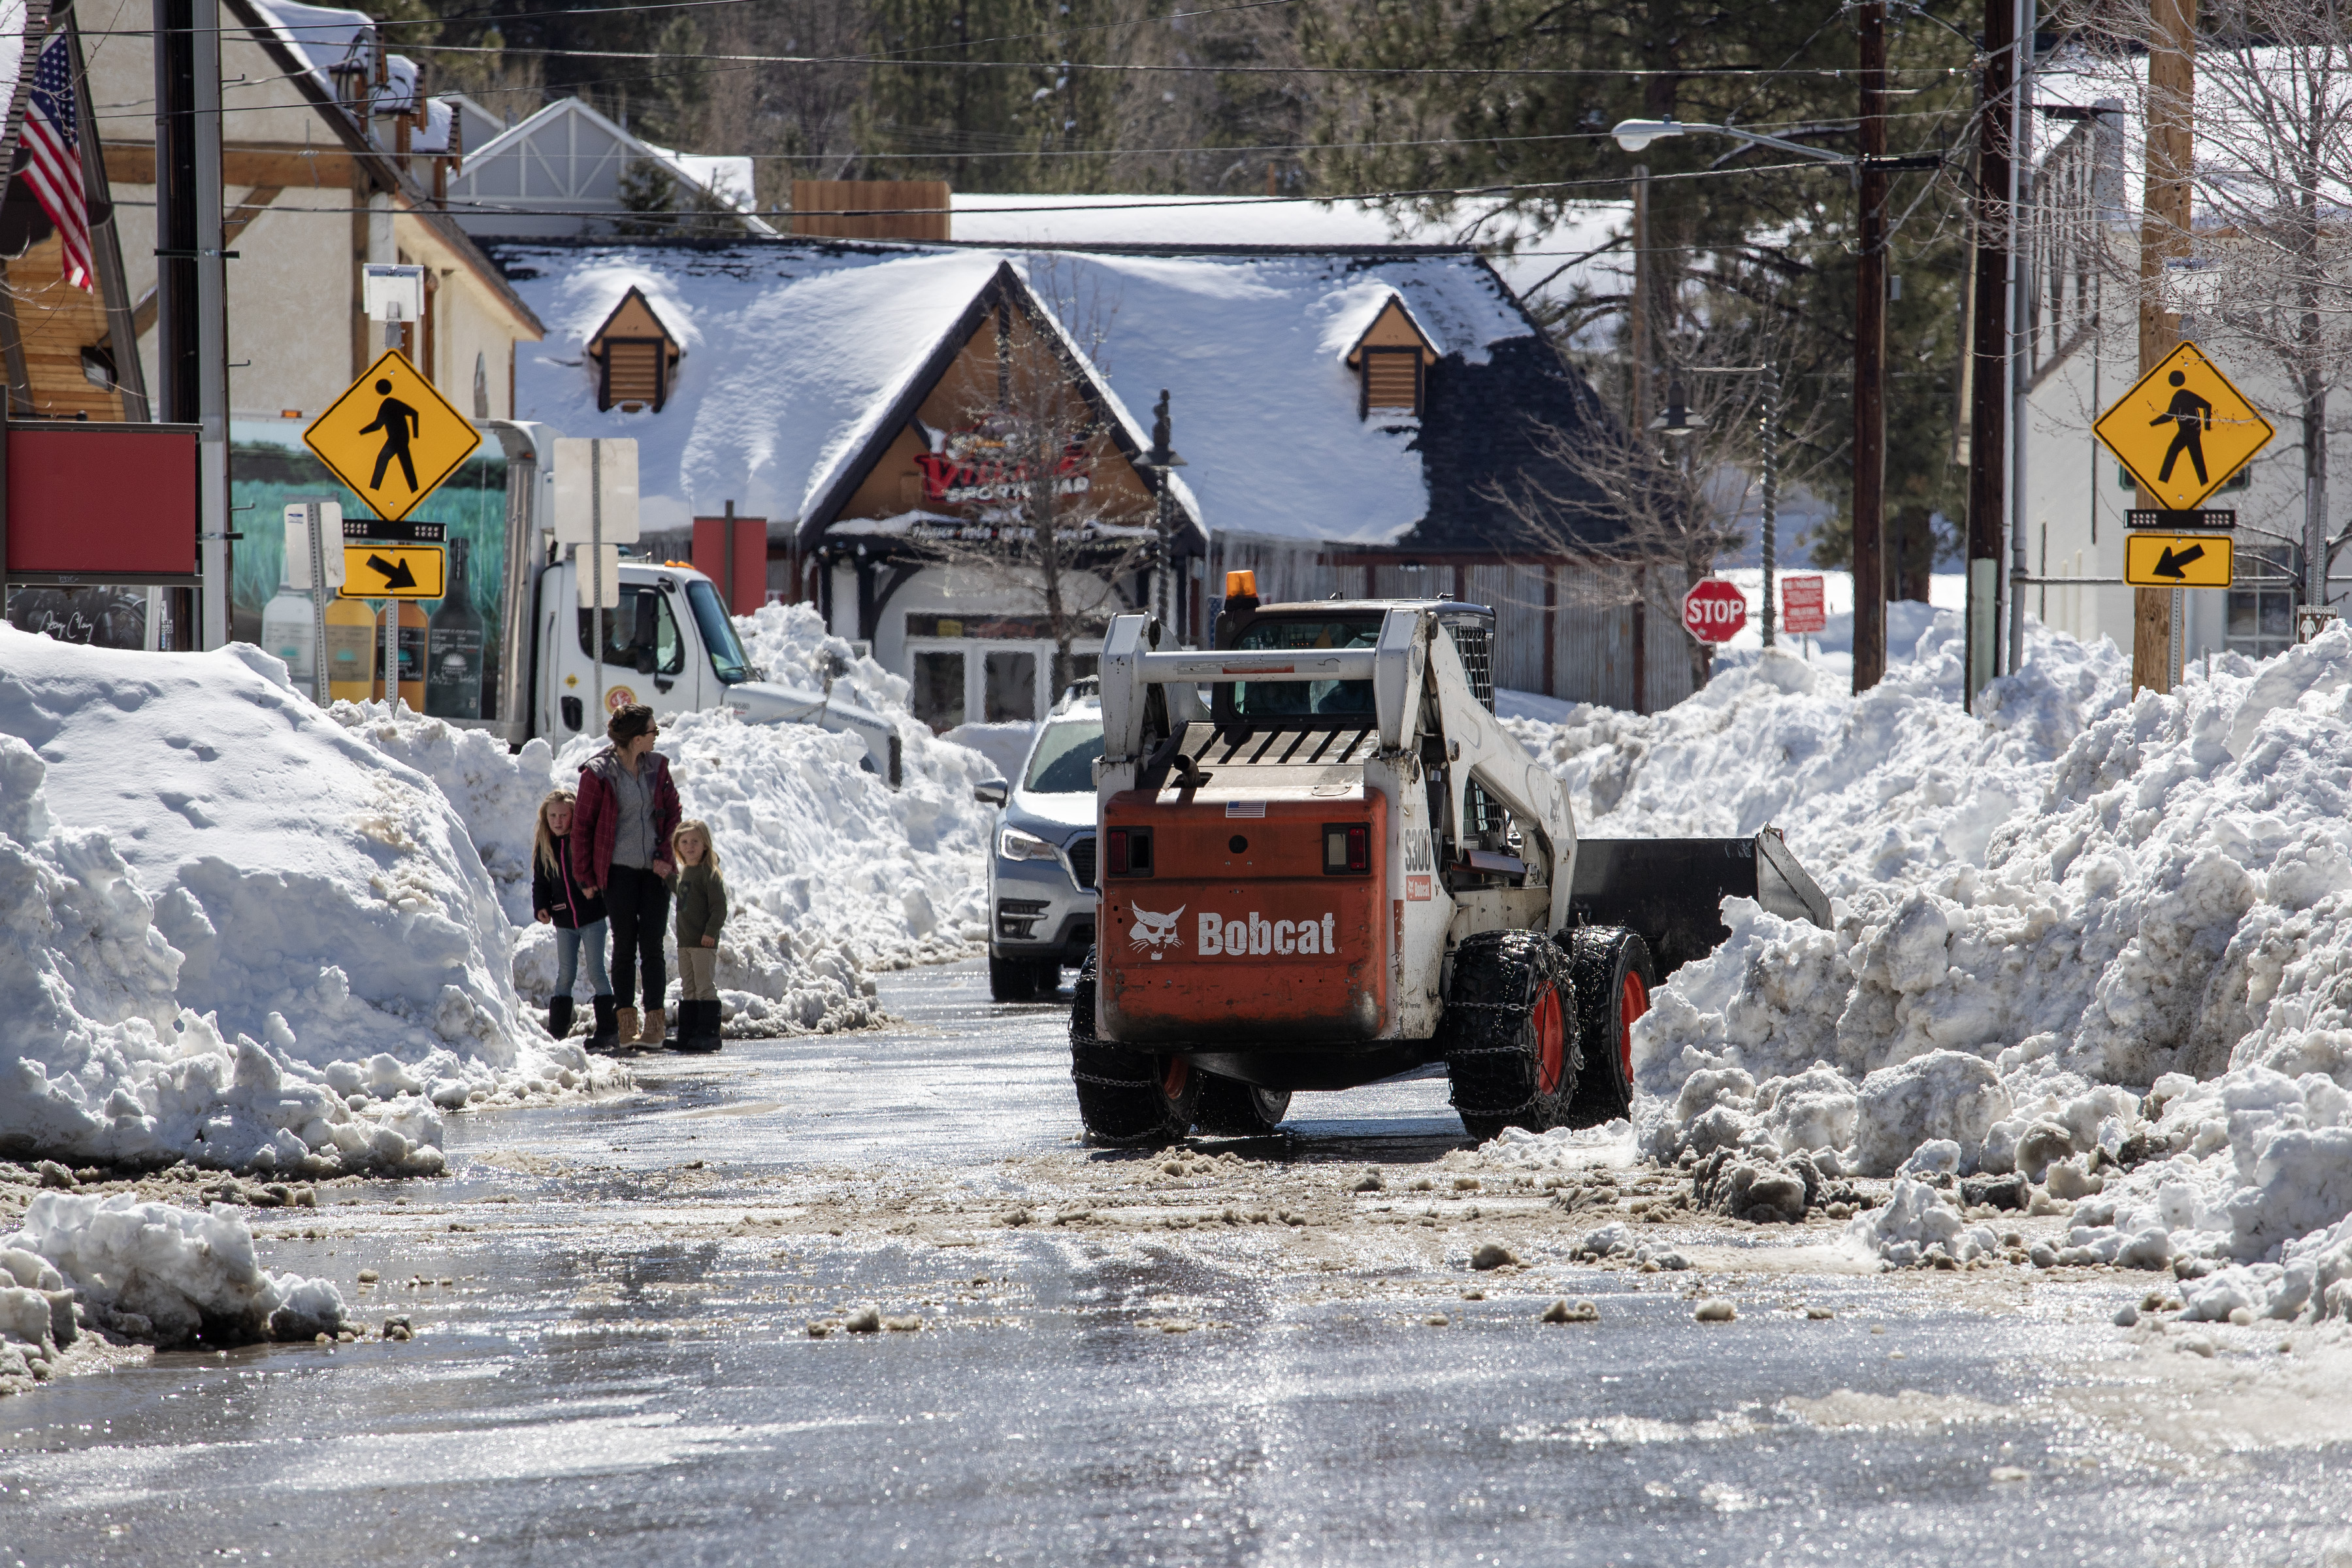 Big Bear Lake streets are still choked with snow following successive storms which blanketed San Bernardino Mountain communities on Friday, March 3, 2023 in Big Bear Lake, Calif. (Brian van der Brug–Los Angeles Times via Getty Images)